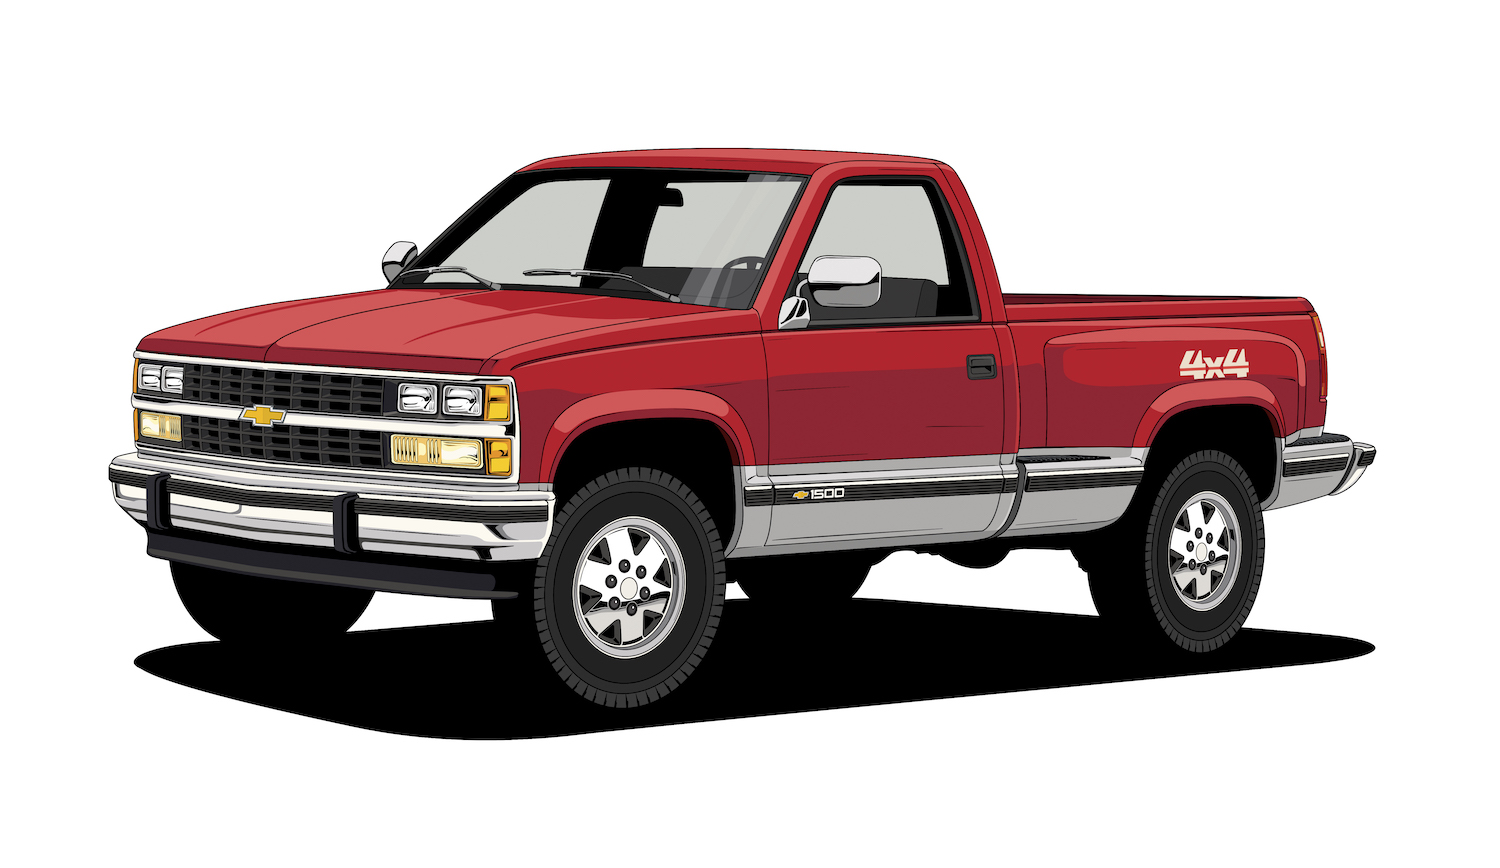 Red 1988 Chevrolet K1500 GMT400 classic pickup truck sketch by General Motors.